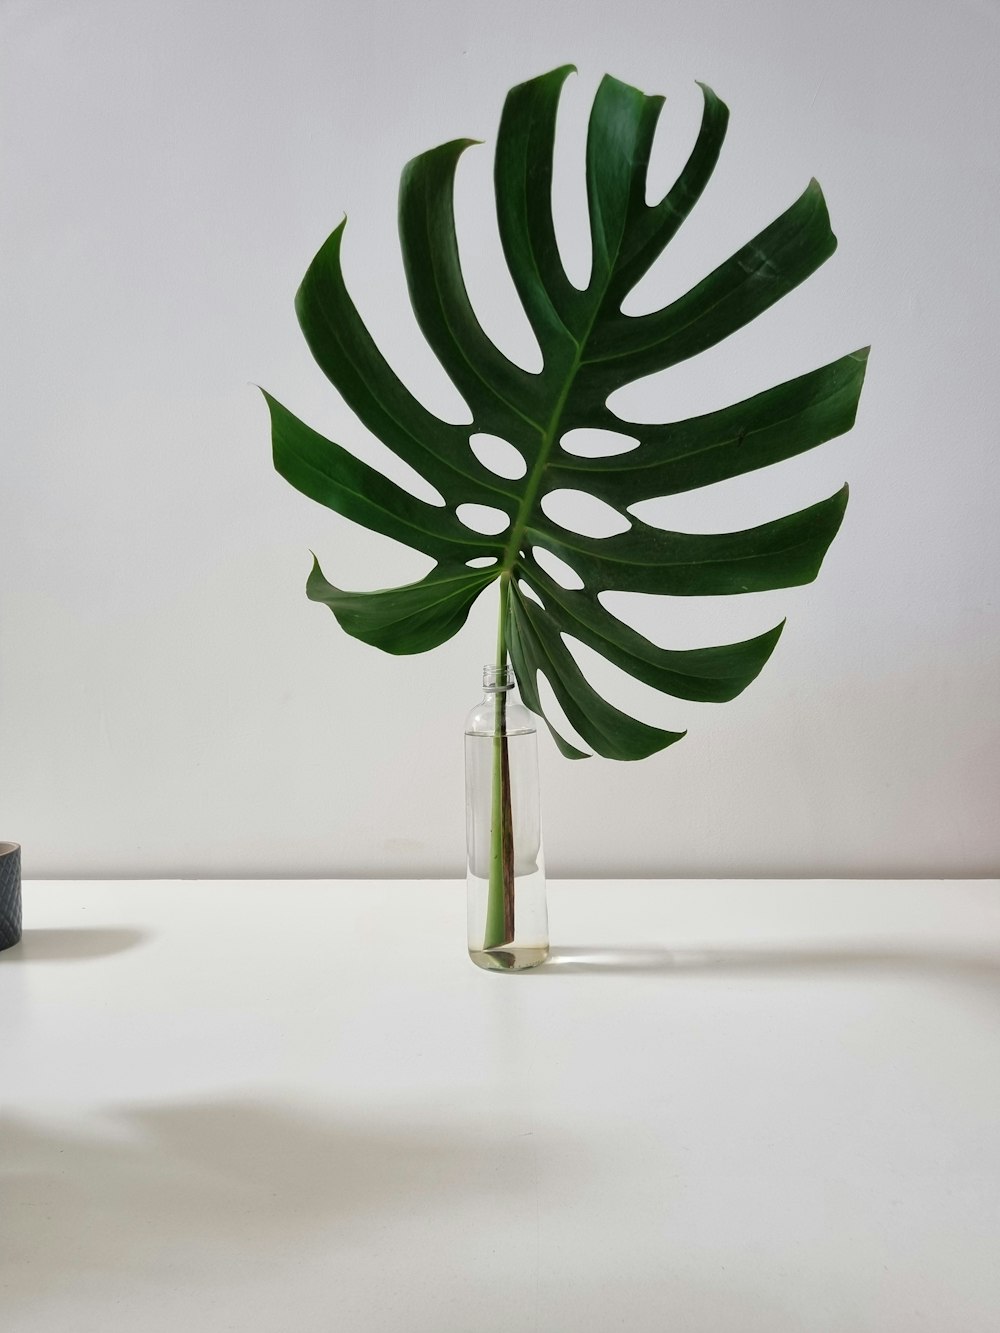 a large green leaf in a glass vase